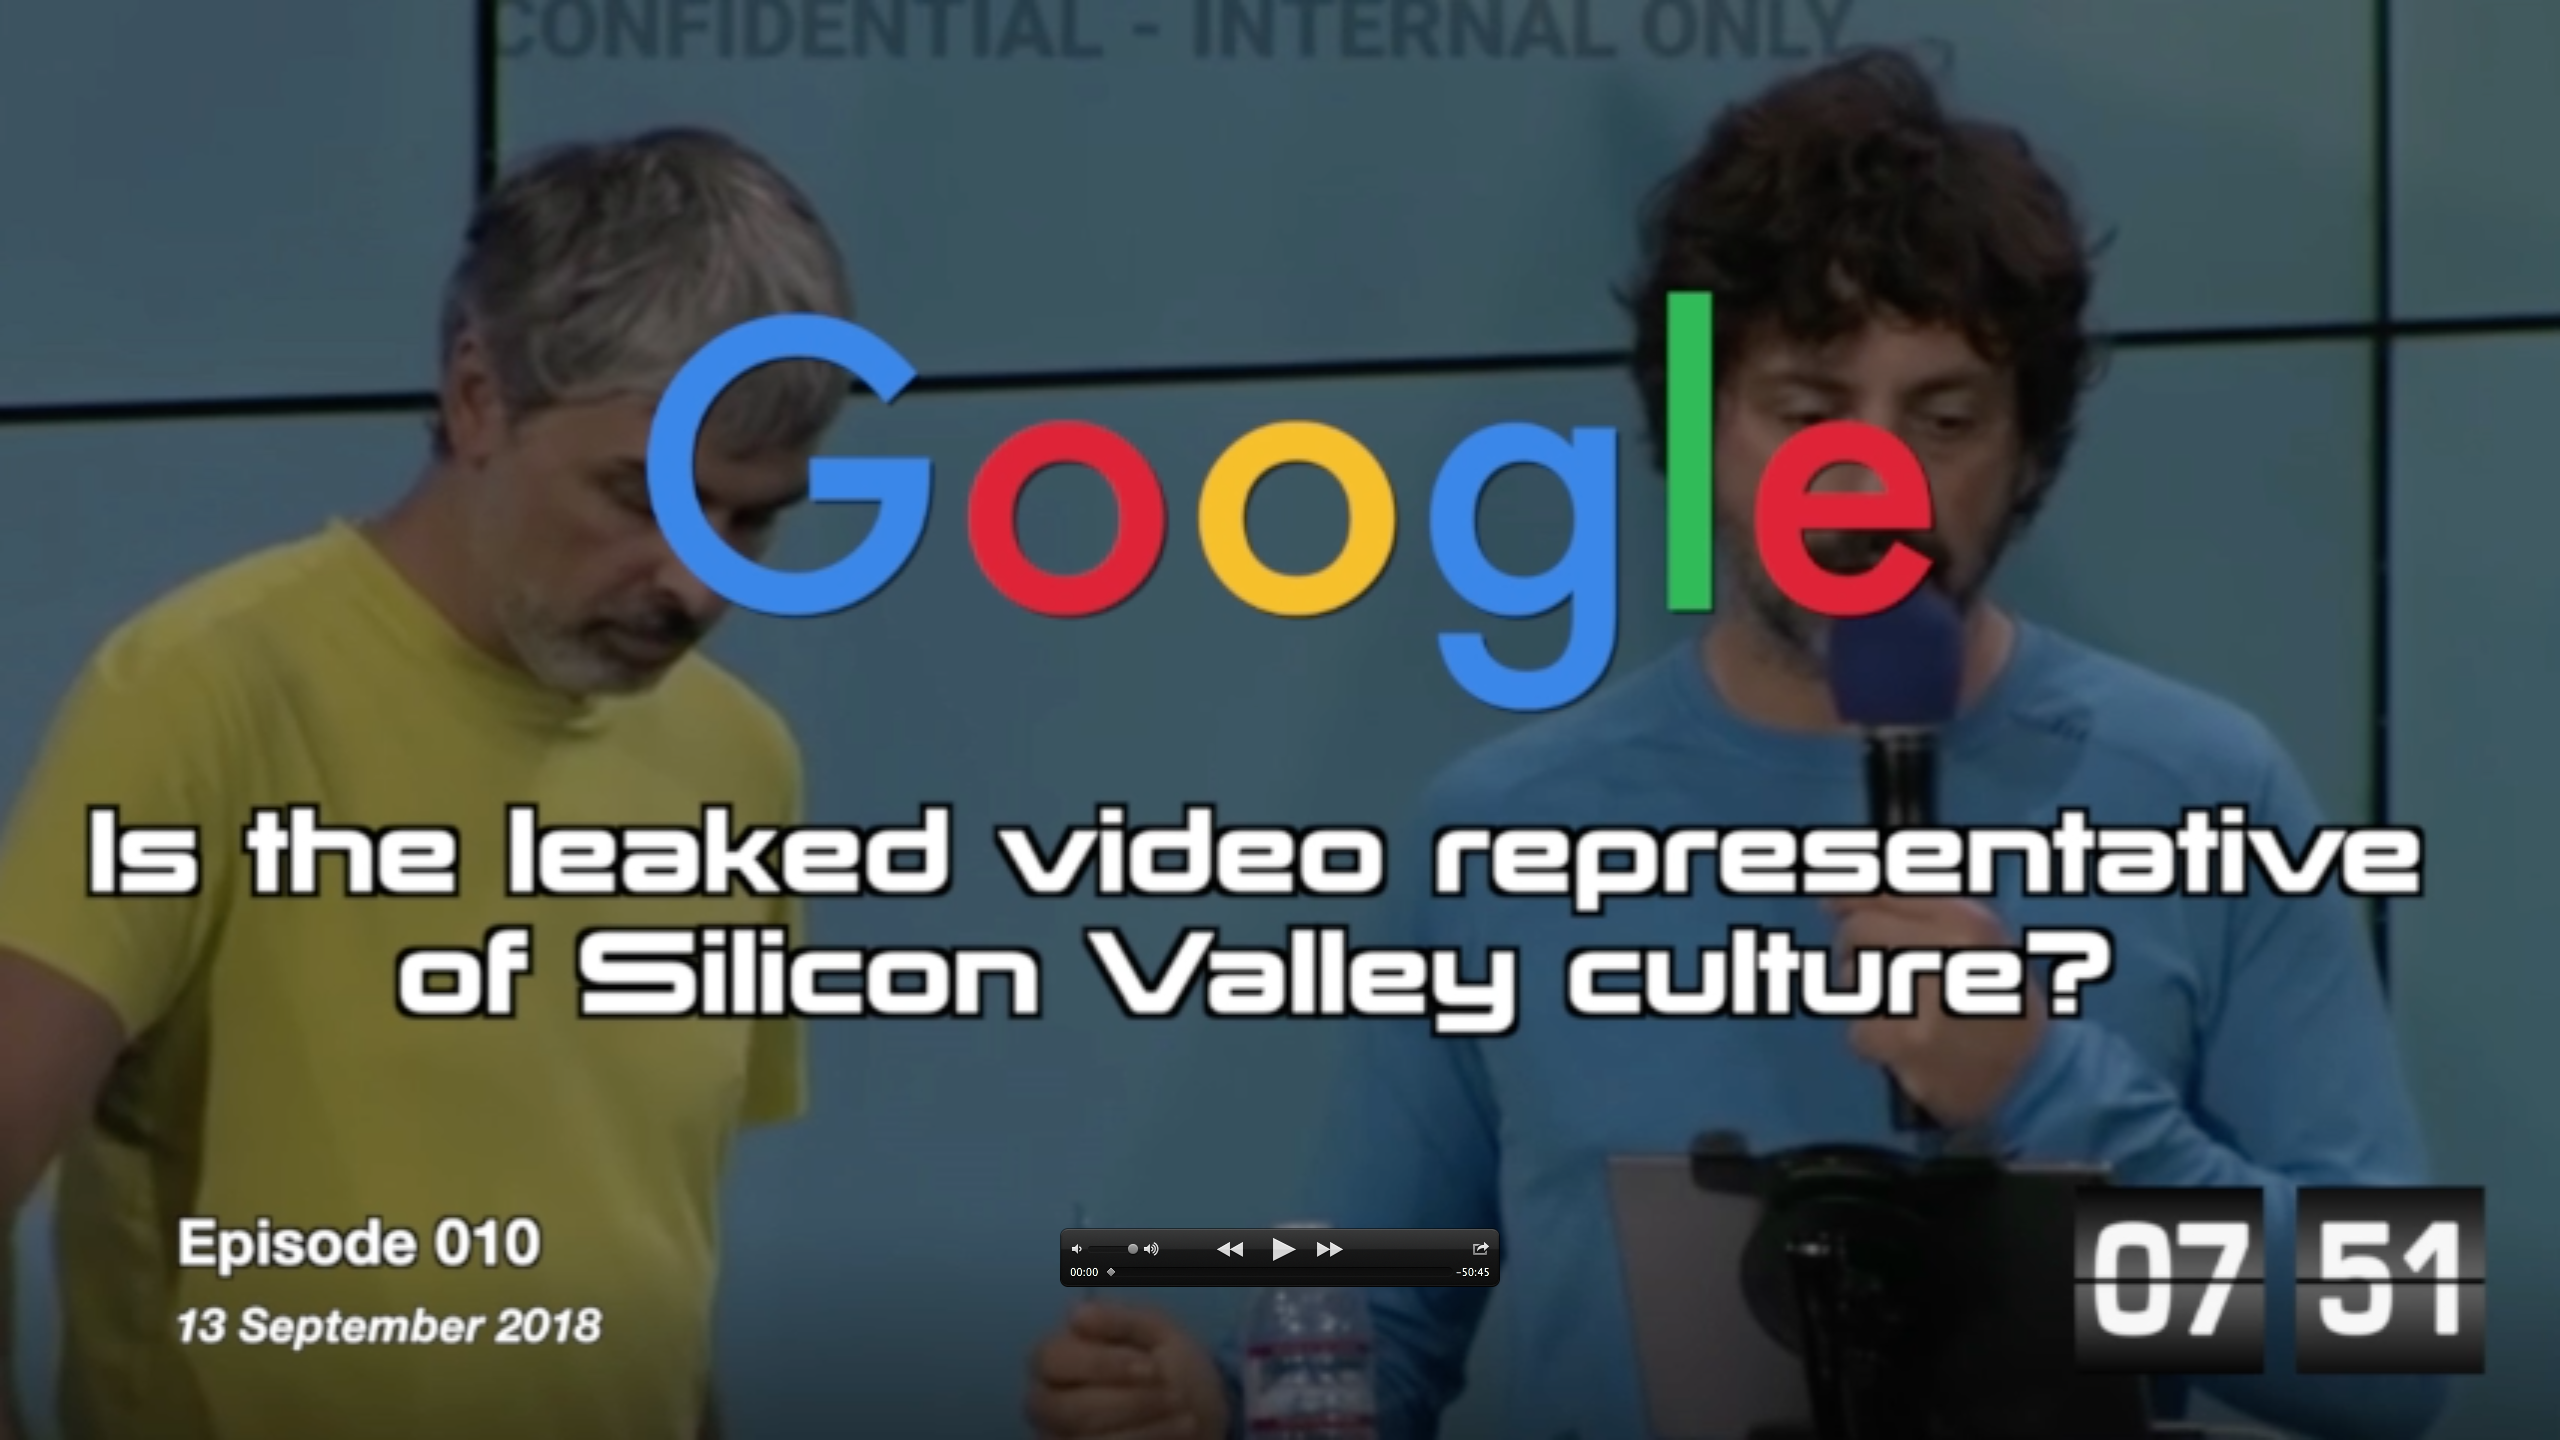 [Episode 010] Google: Is the leaked video representative of Silicon Valley culture?